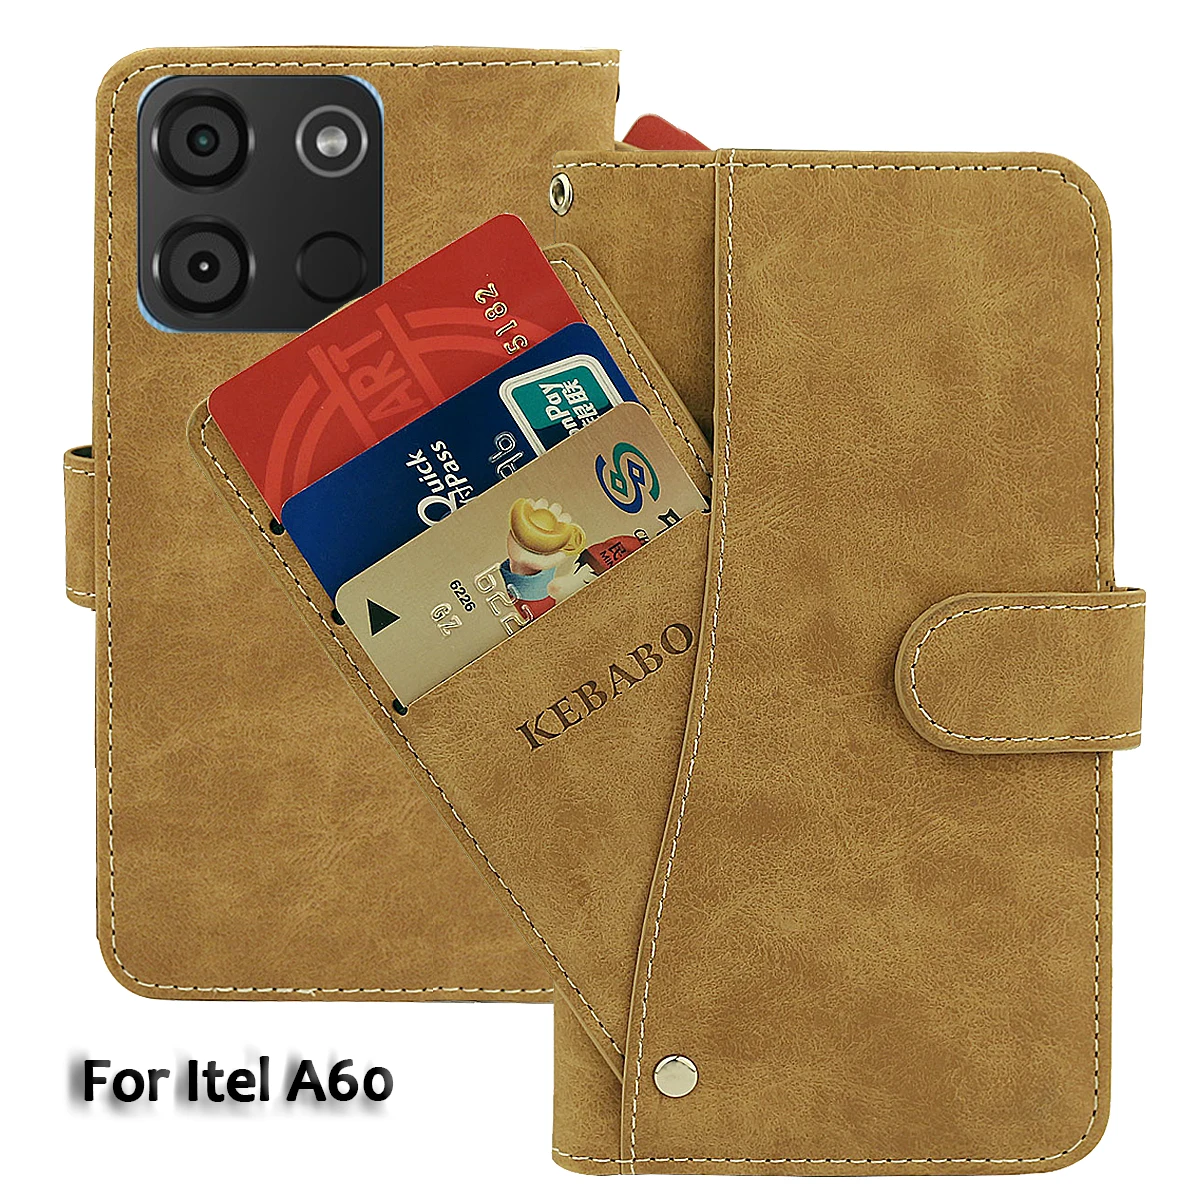 

Vintage Leather Wallet Itel A60 Case 6.6" Flip Luxury Card Slots Cover Magnet Phone Protective Cases Bags